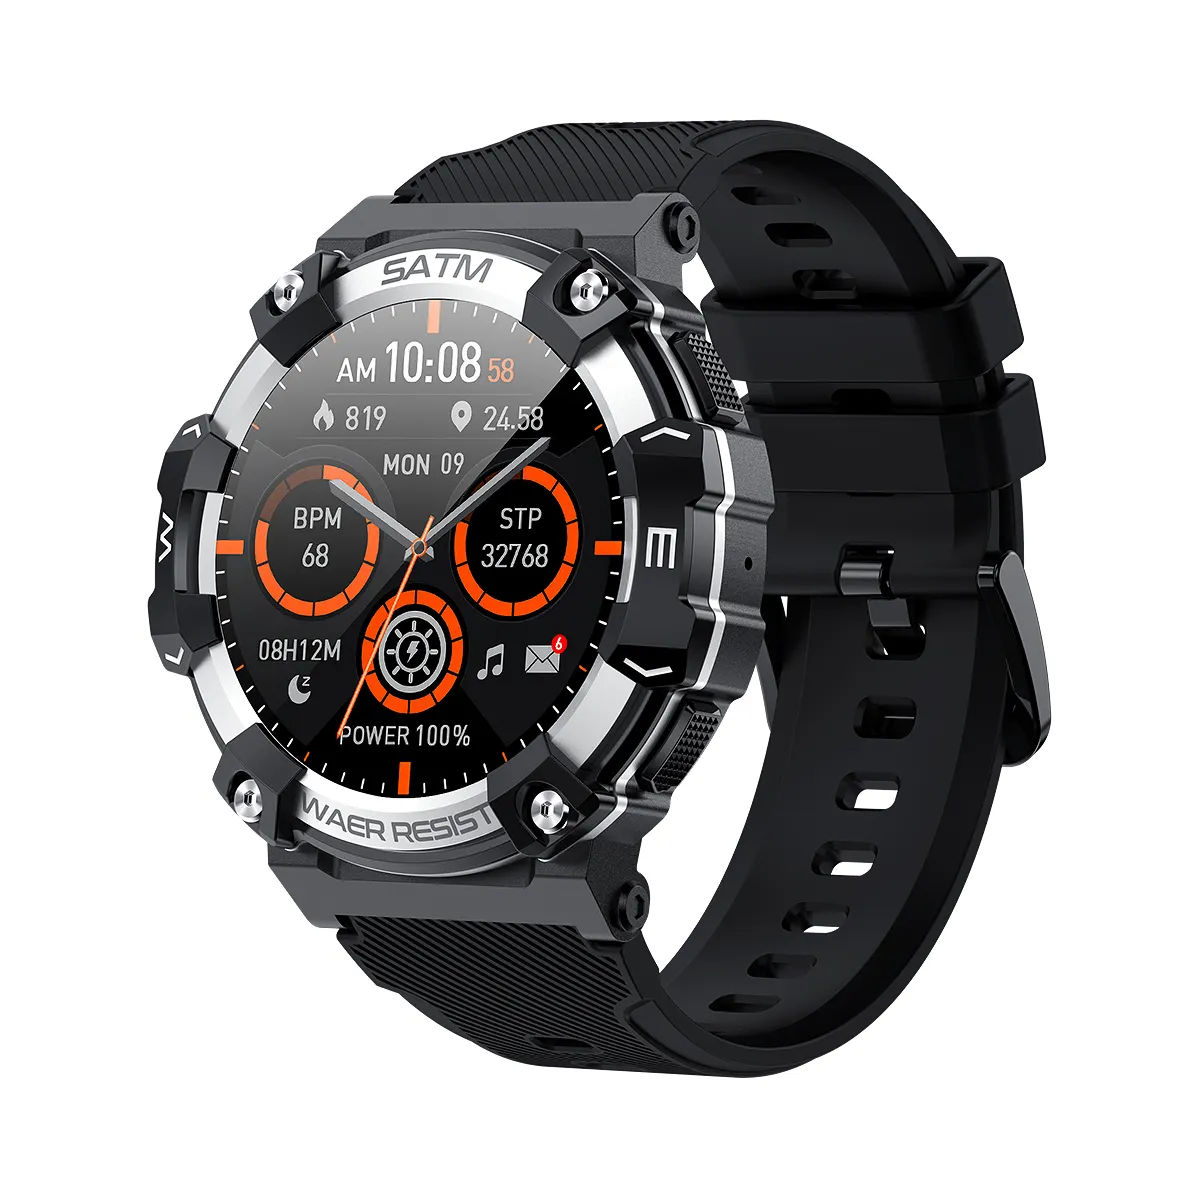 PG666 1.39 Inch Outdoor Sports Smart Watch IP68 Waterproof Phone Call Blood Pressure Heart Rate Fitness Compass USB WiFi iOS